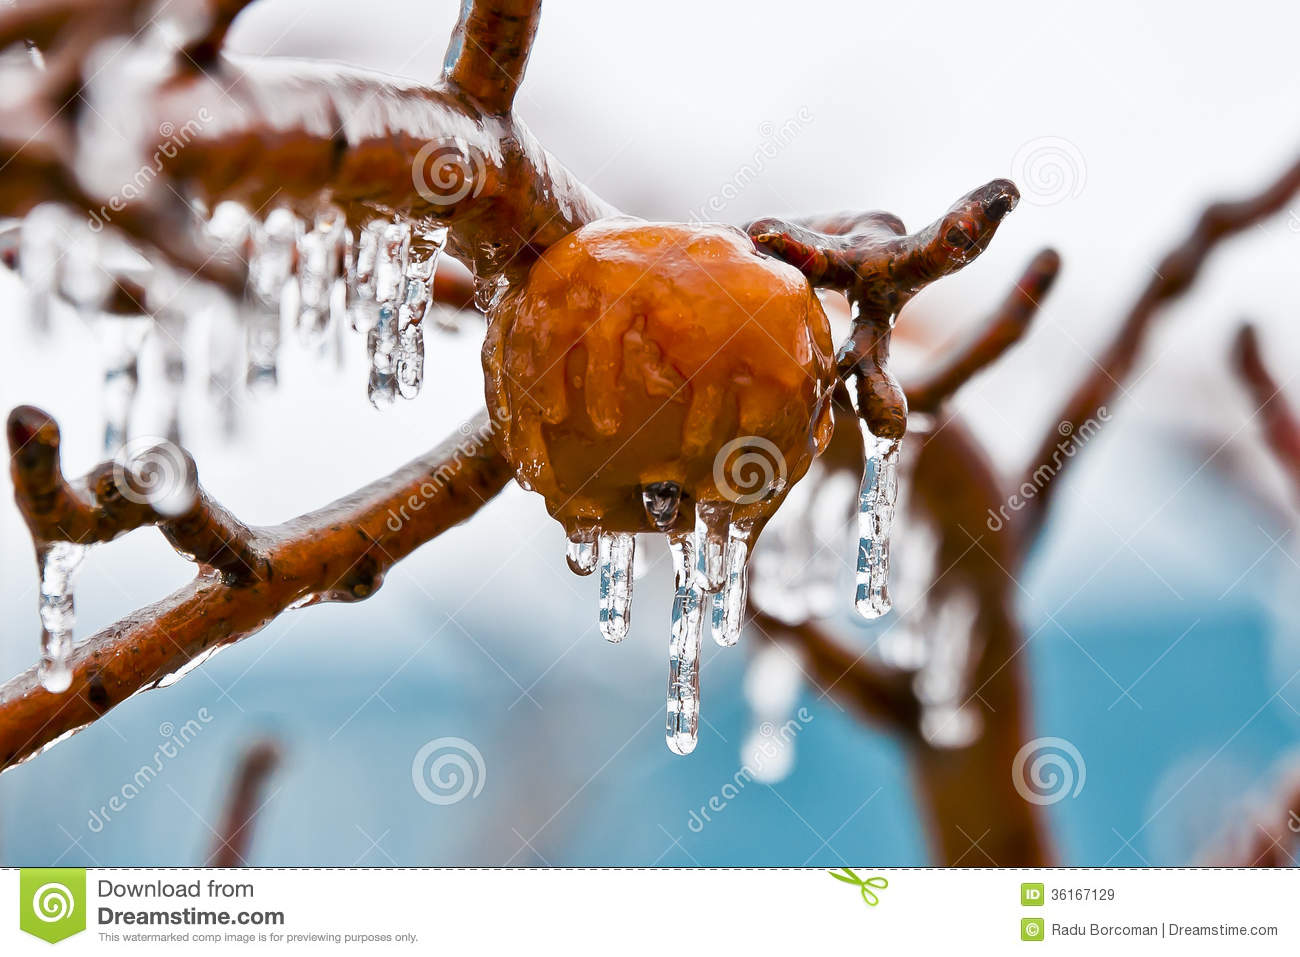 Apples In Freezing Rain Royalty Free Stock Images   Image  36167129